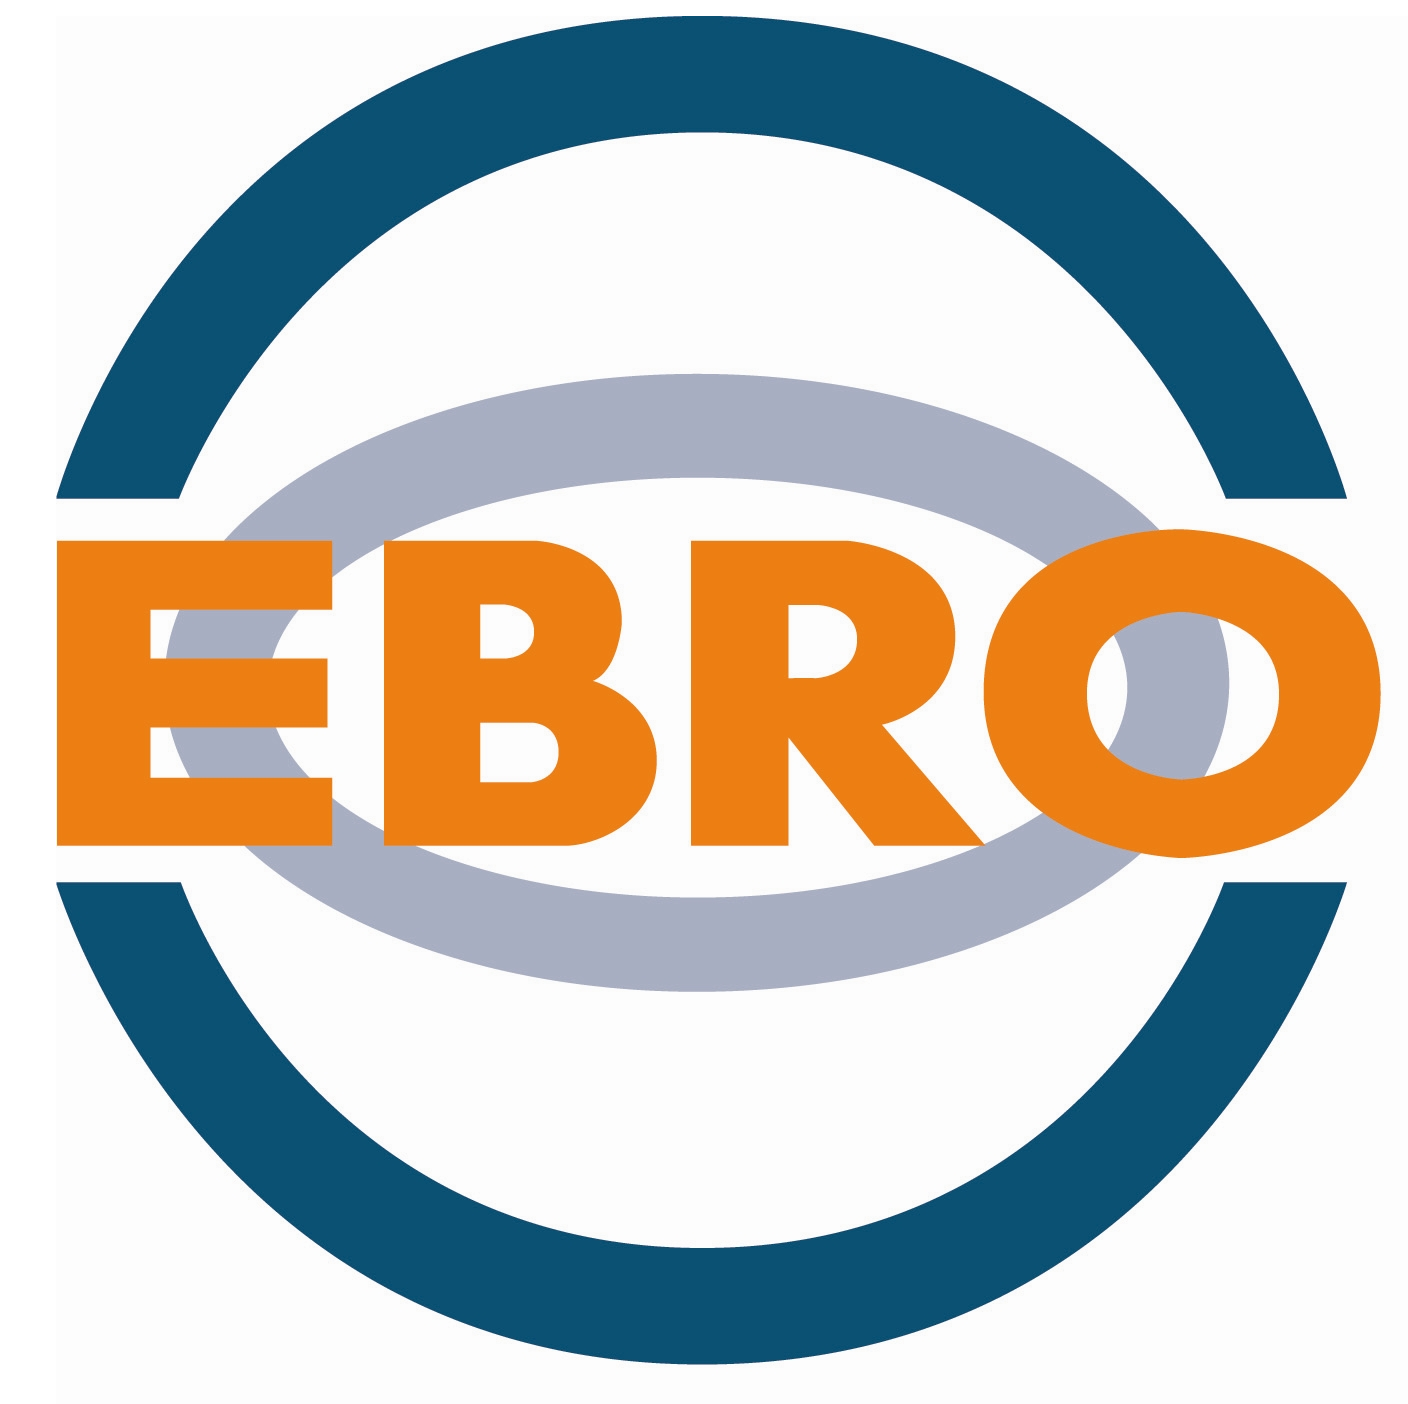 A wholly owned UK subsidiary of EBRO ARMATUREN, the largest independent manufacturer of Butterfly Valves and actuators in Europe.